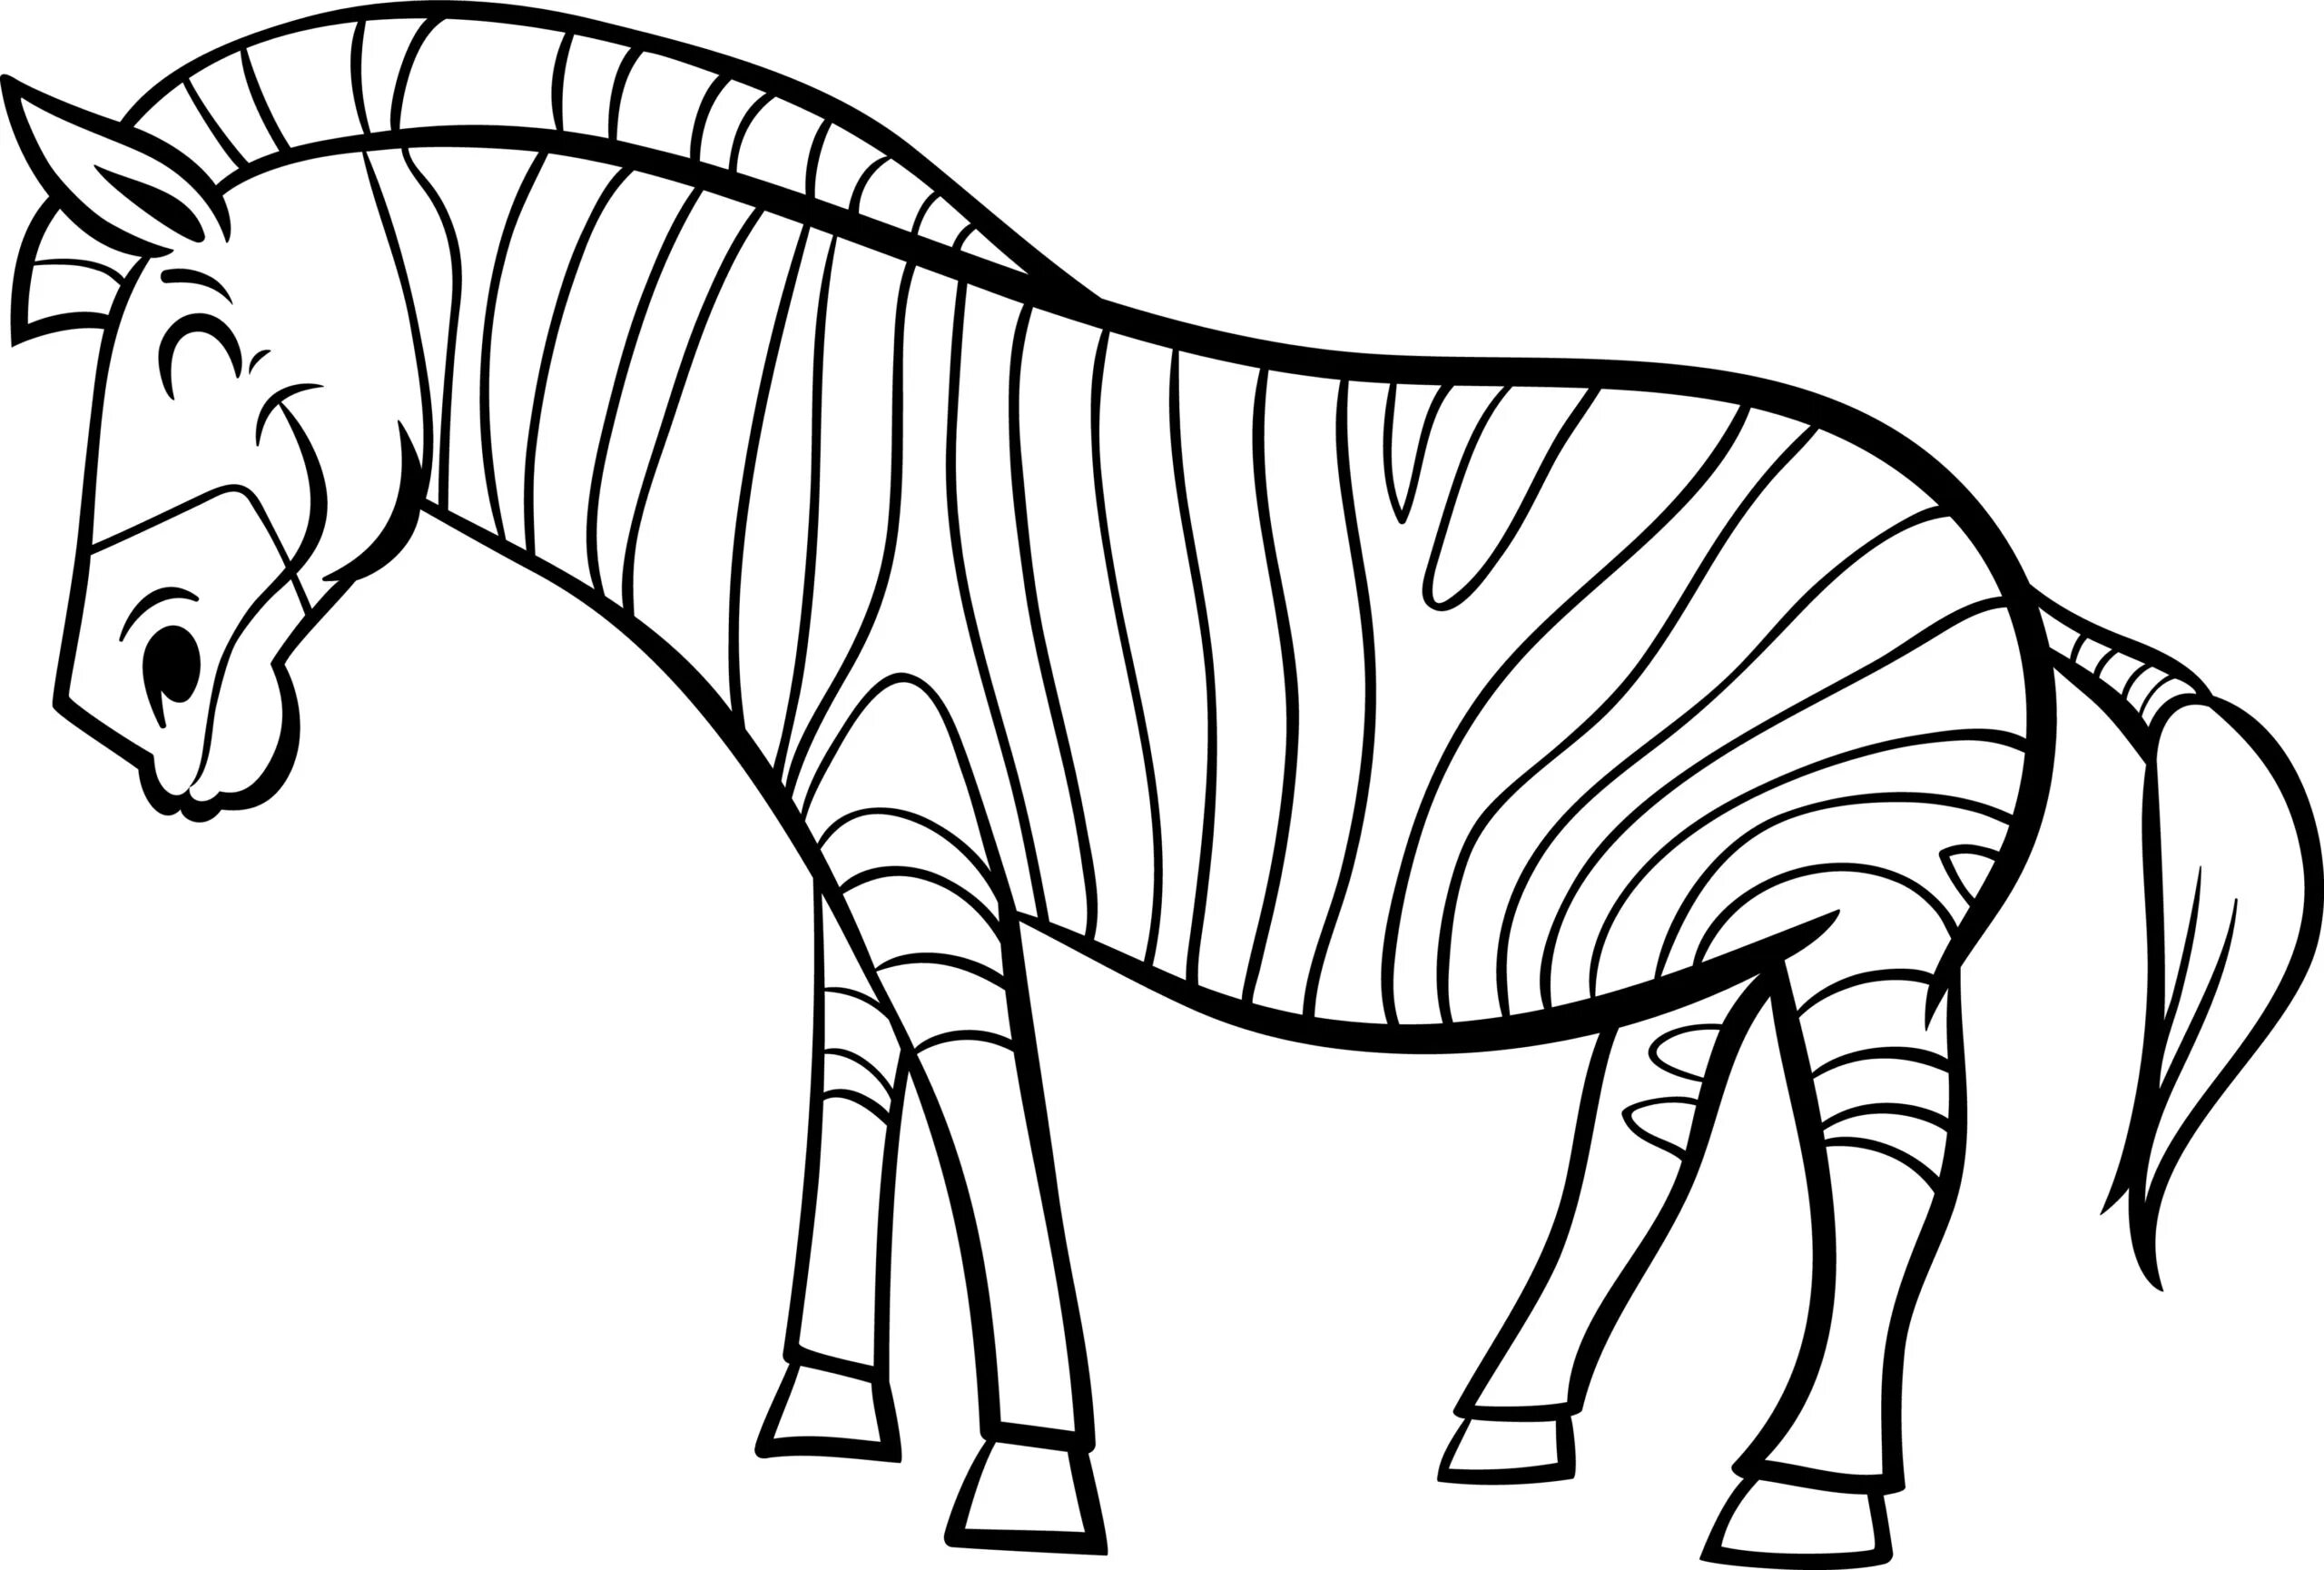 Blissful zebra coloring book for kids